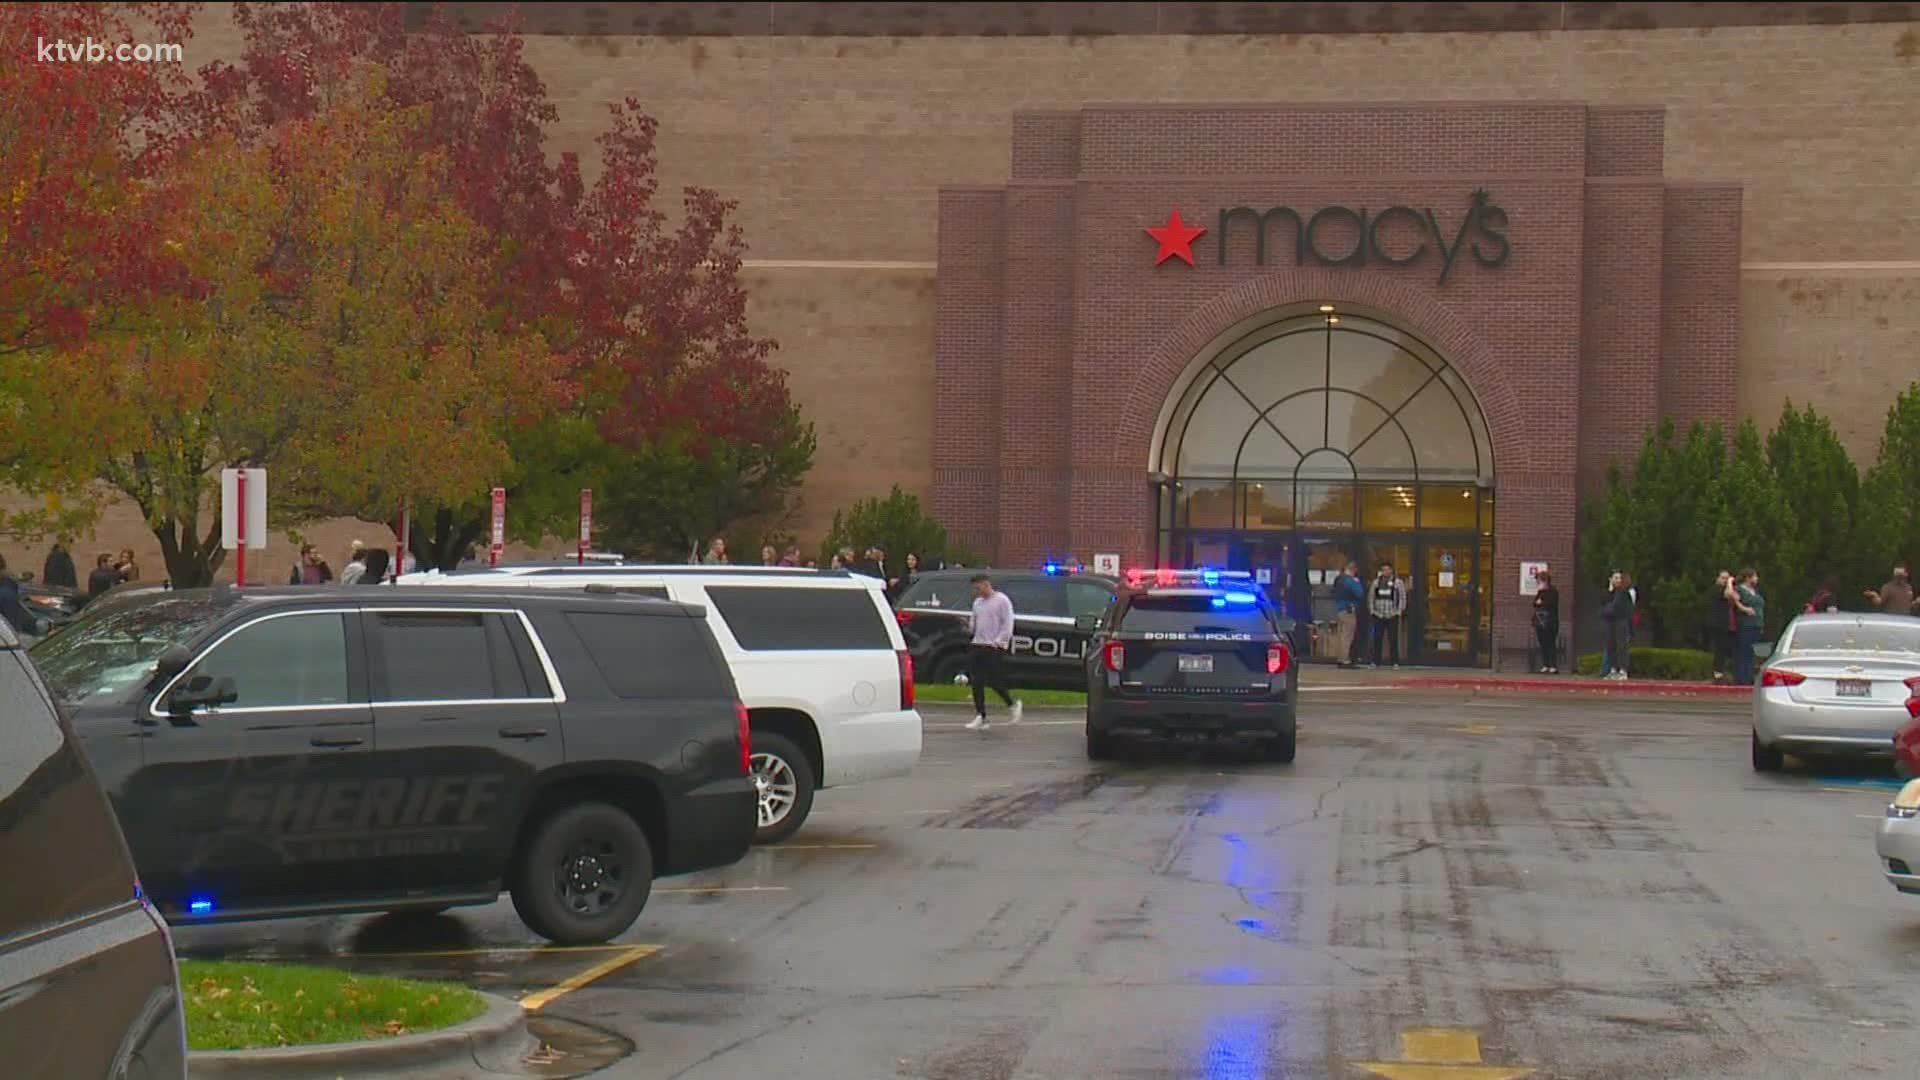 The security company did not institute controls to protect security workers at the Boise mall from hazards during the fatal October 2021 shooting, according to OSHA.